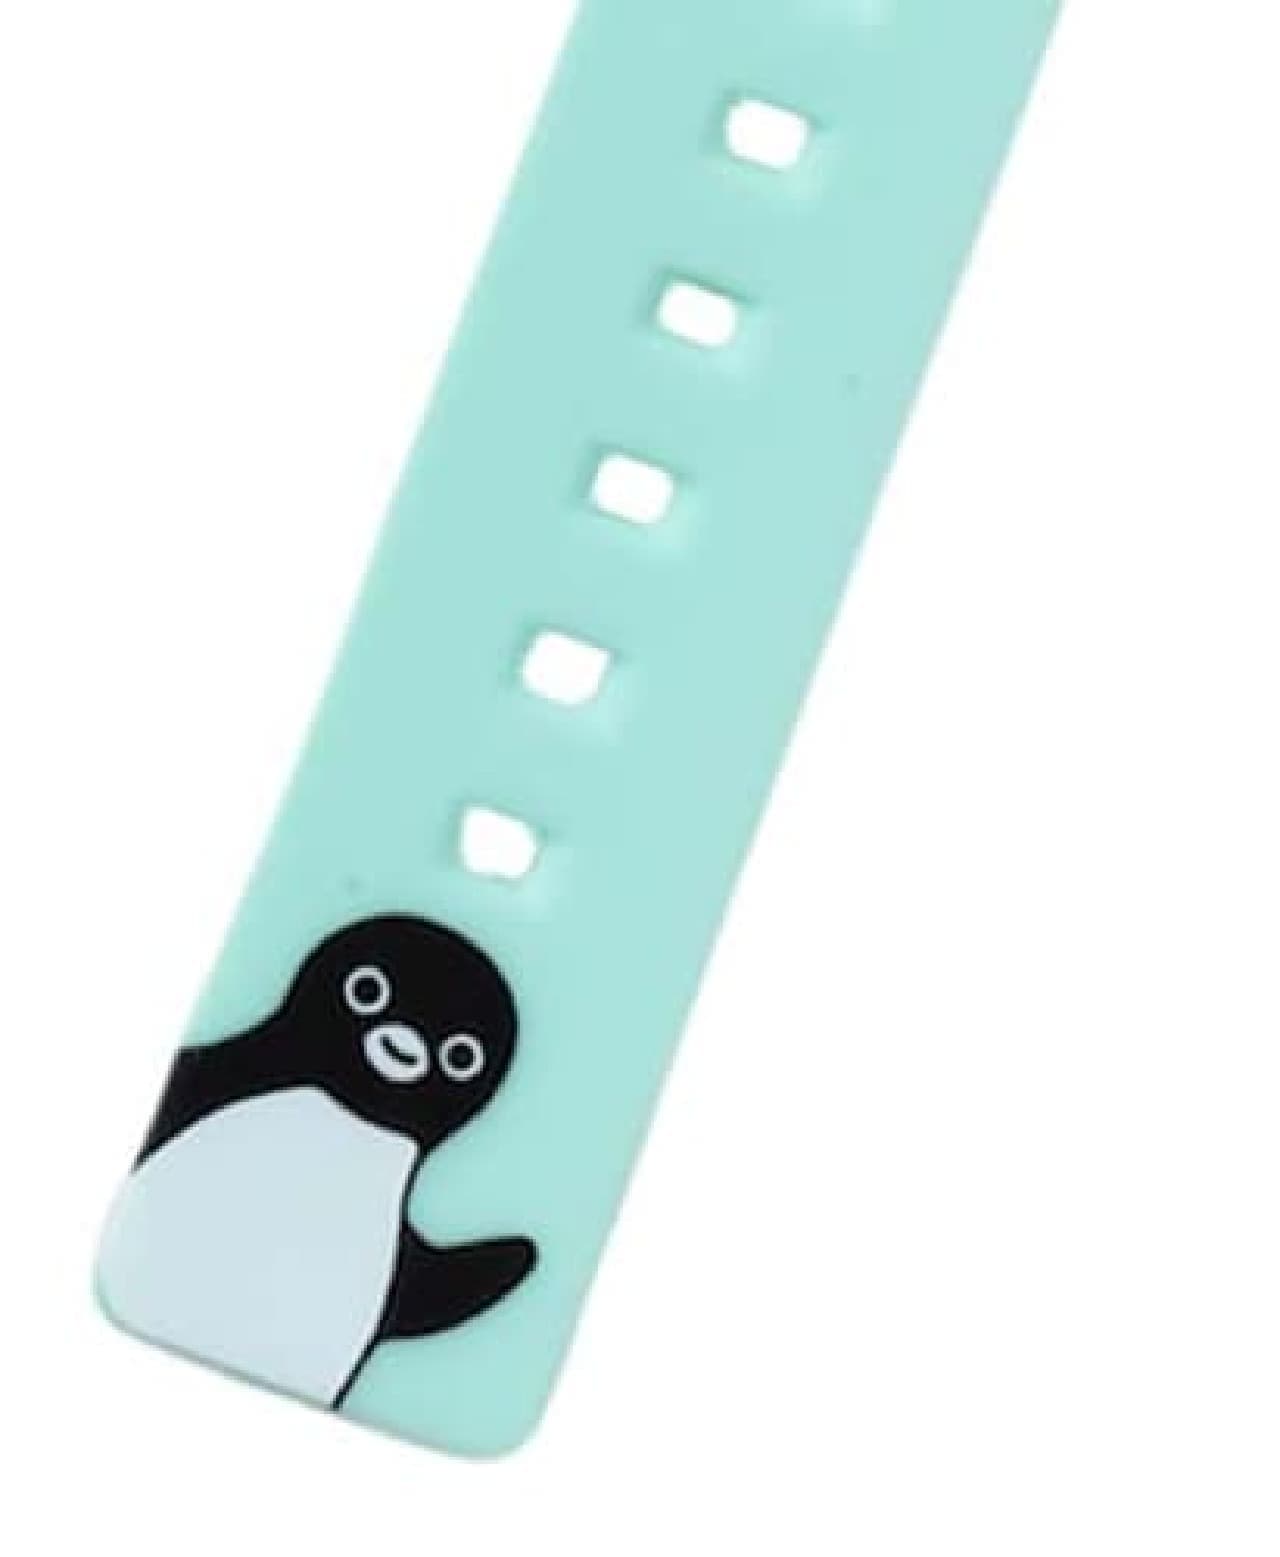 "Q & Q Smile Solar x Suica's Penguin Wrist Watch" designed by "Suica's Penguin" is now available. It will be on sale from December 2nd.